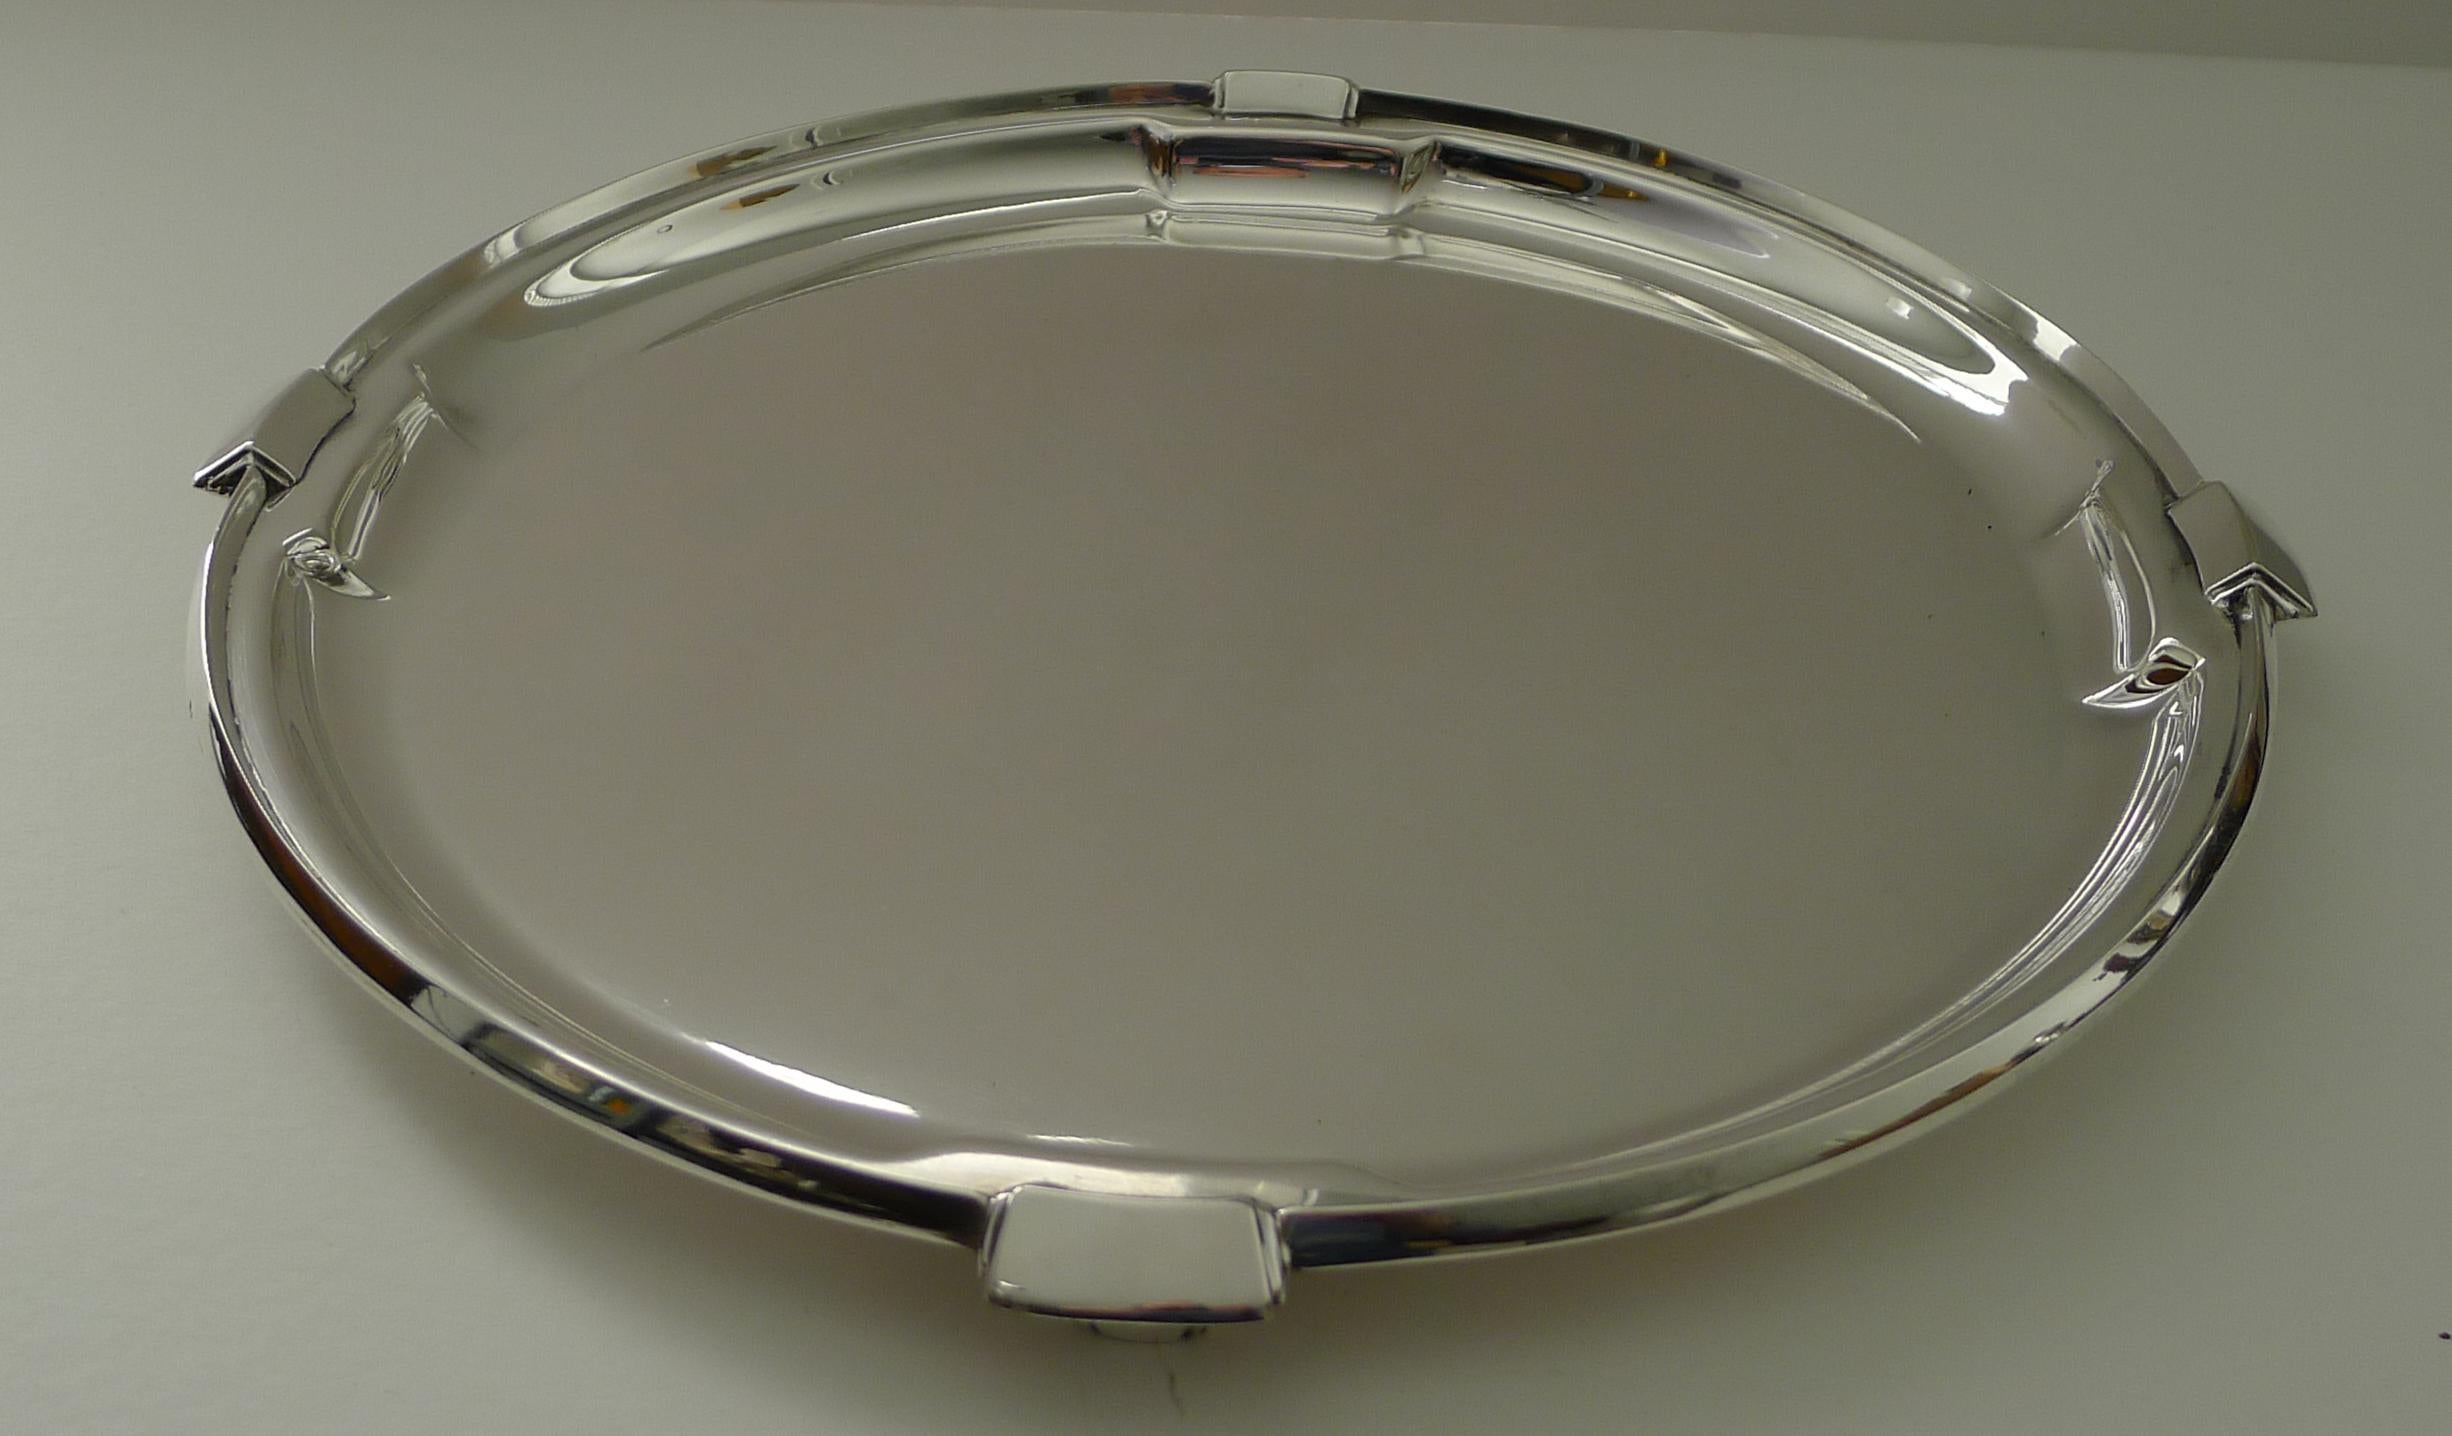 A stunning Art Deco cocktail tray by the top notch silversmith, Walker & Hall of Sheffield.

Standing on four very stylish legs, the tray is solid and heavy ready to adorn the finest of bars. Fully marked on the underside, 